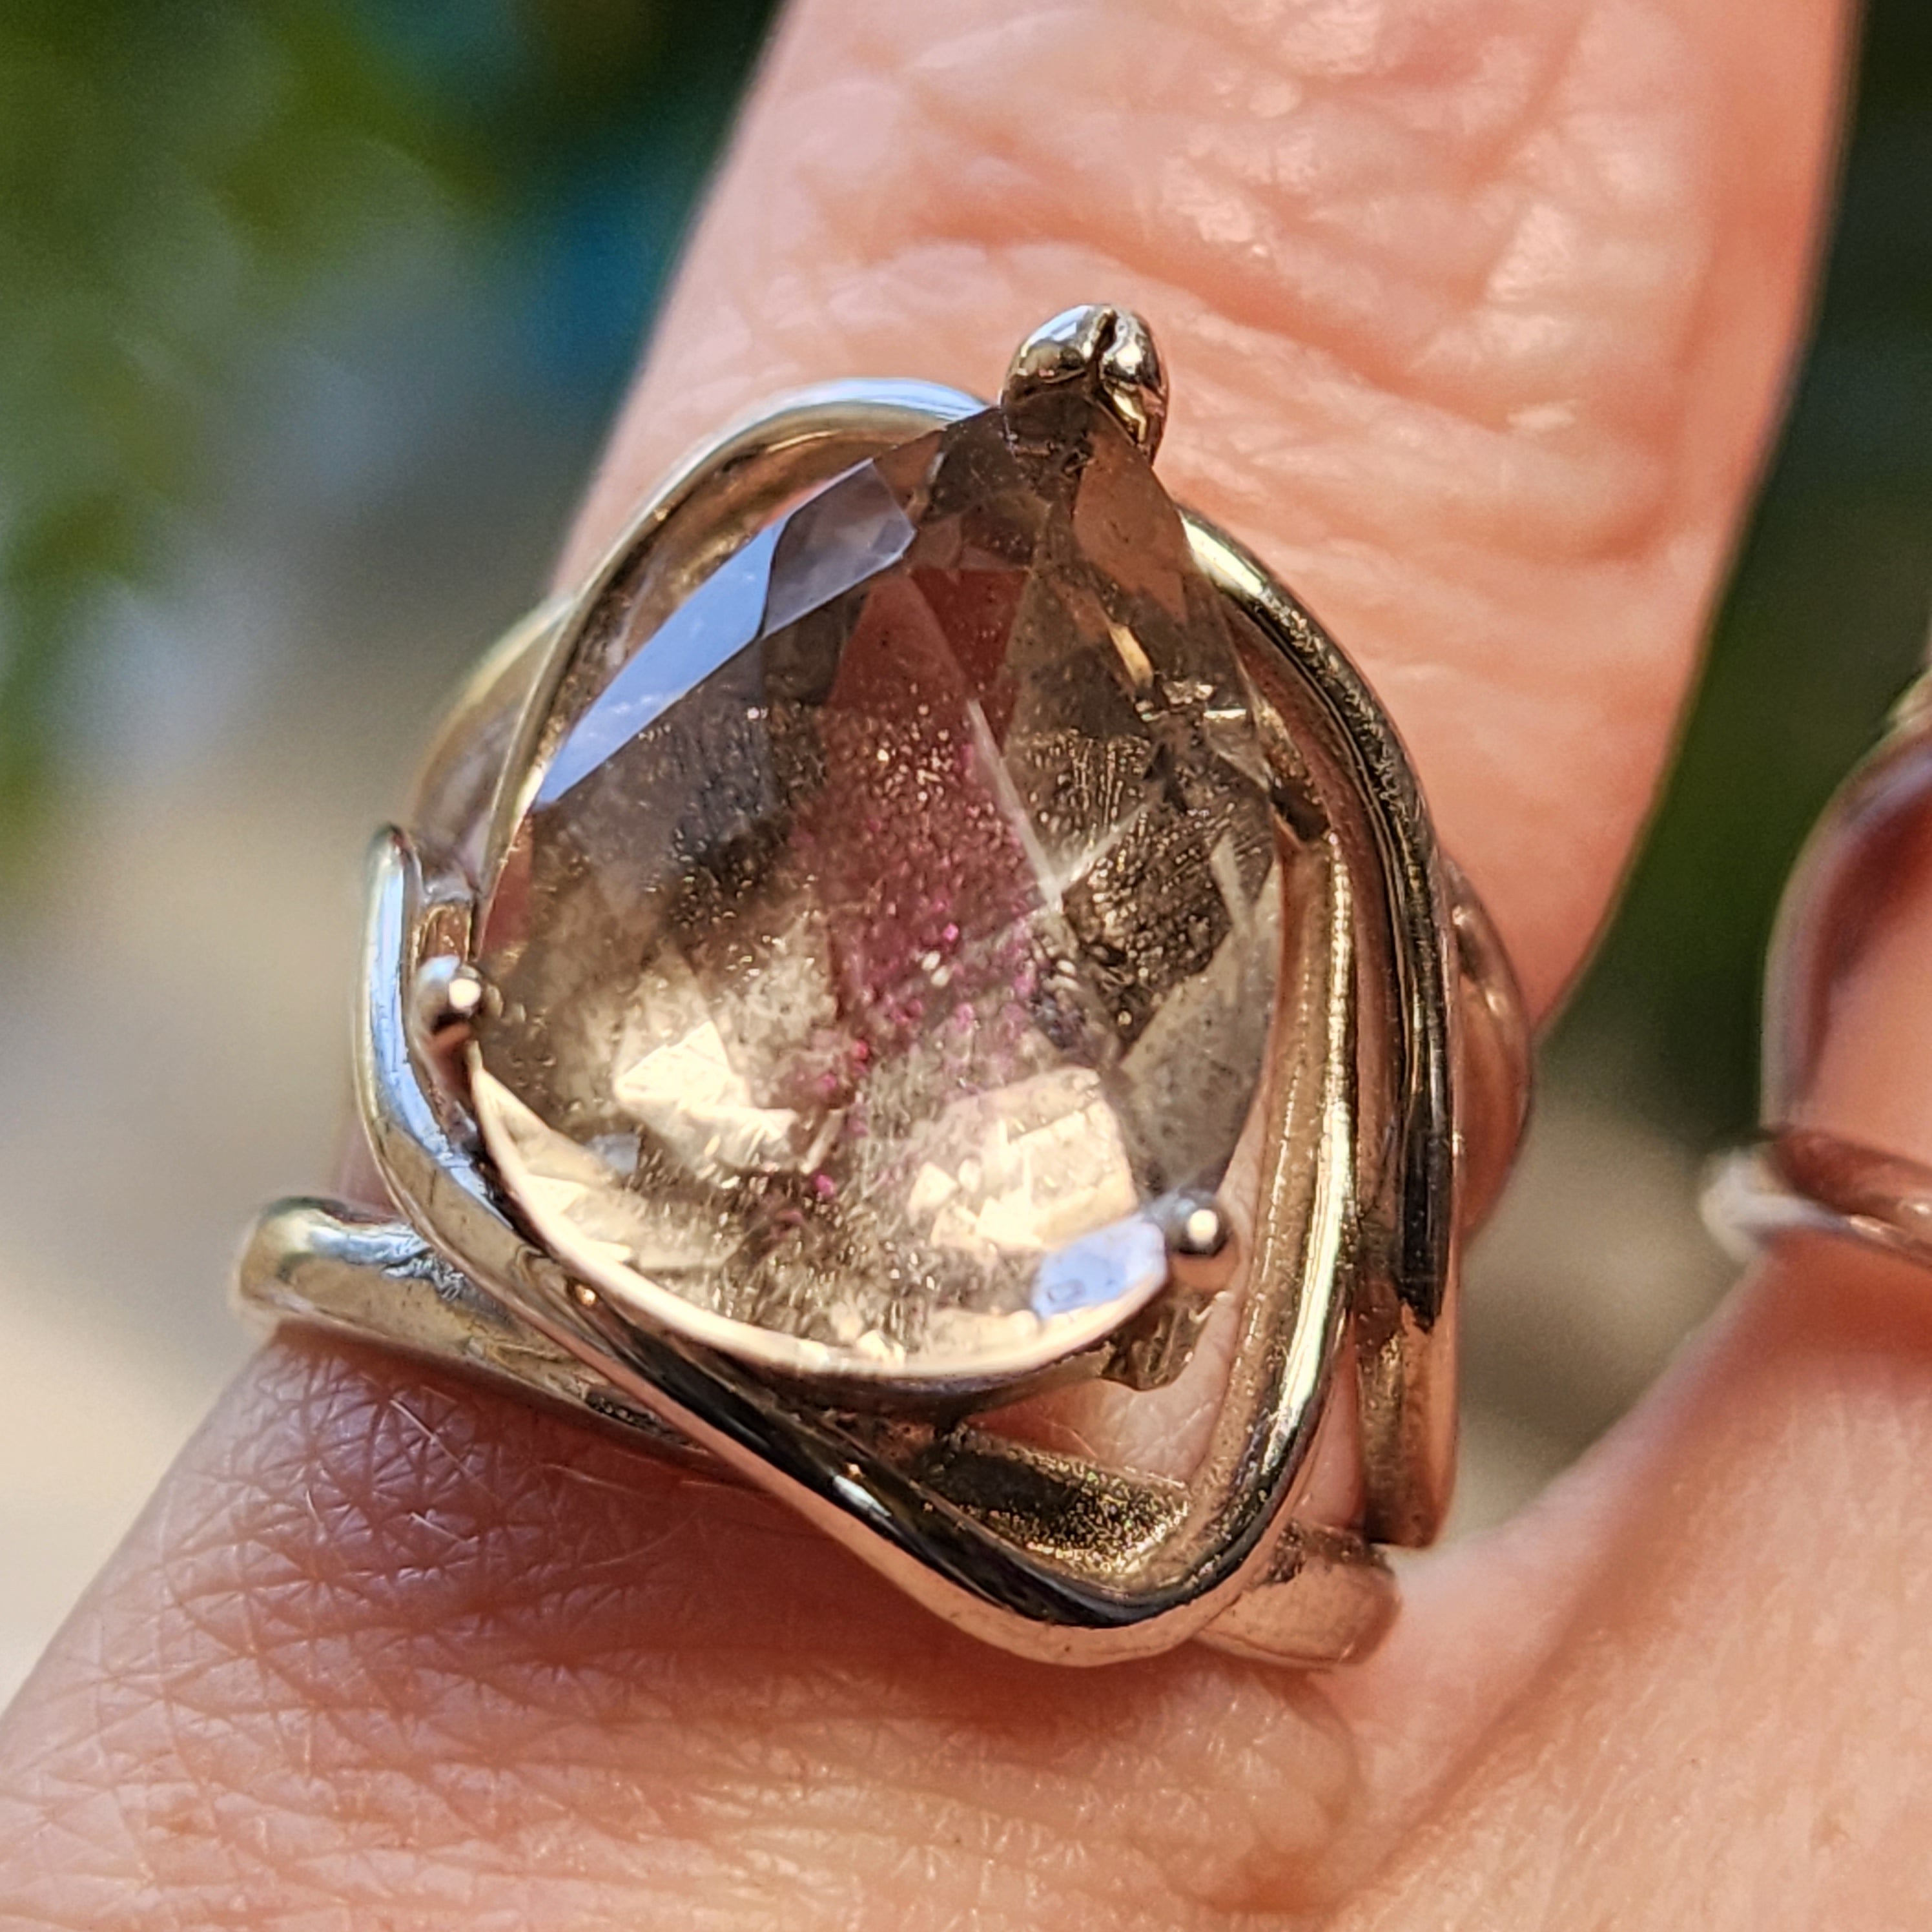 Pink Fire Covellite in Quartz Finger Cuff Adjustable Ring .925 Silver for Manifesting, Enhanced Flow of Energy and Spiritual Transformation